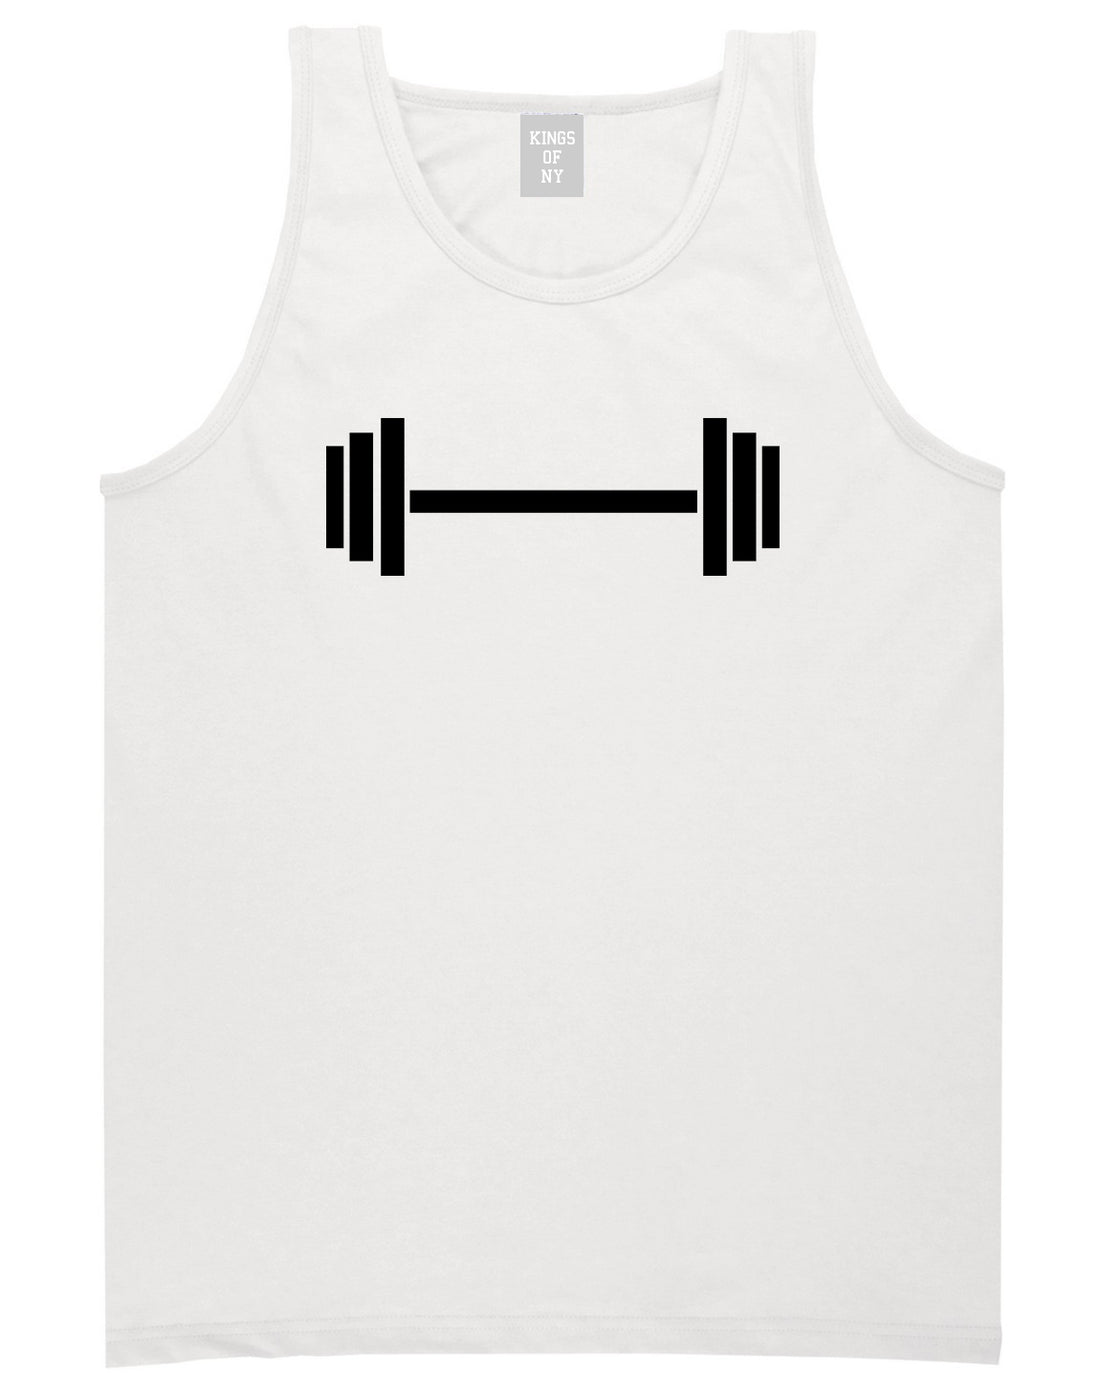 Barbell Workout Gym White Tank Top Shirt by Kings Of NY